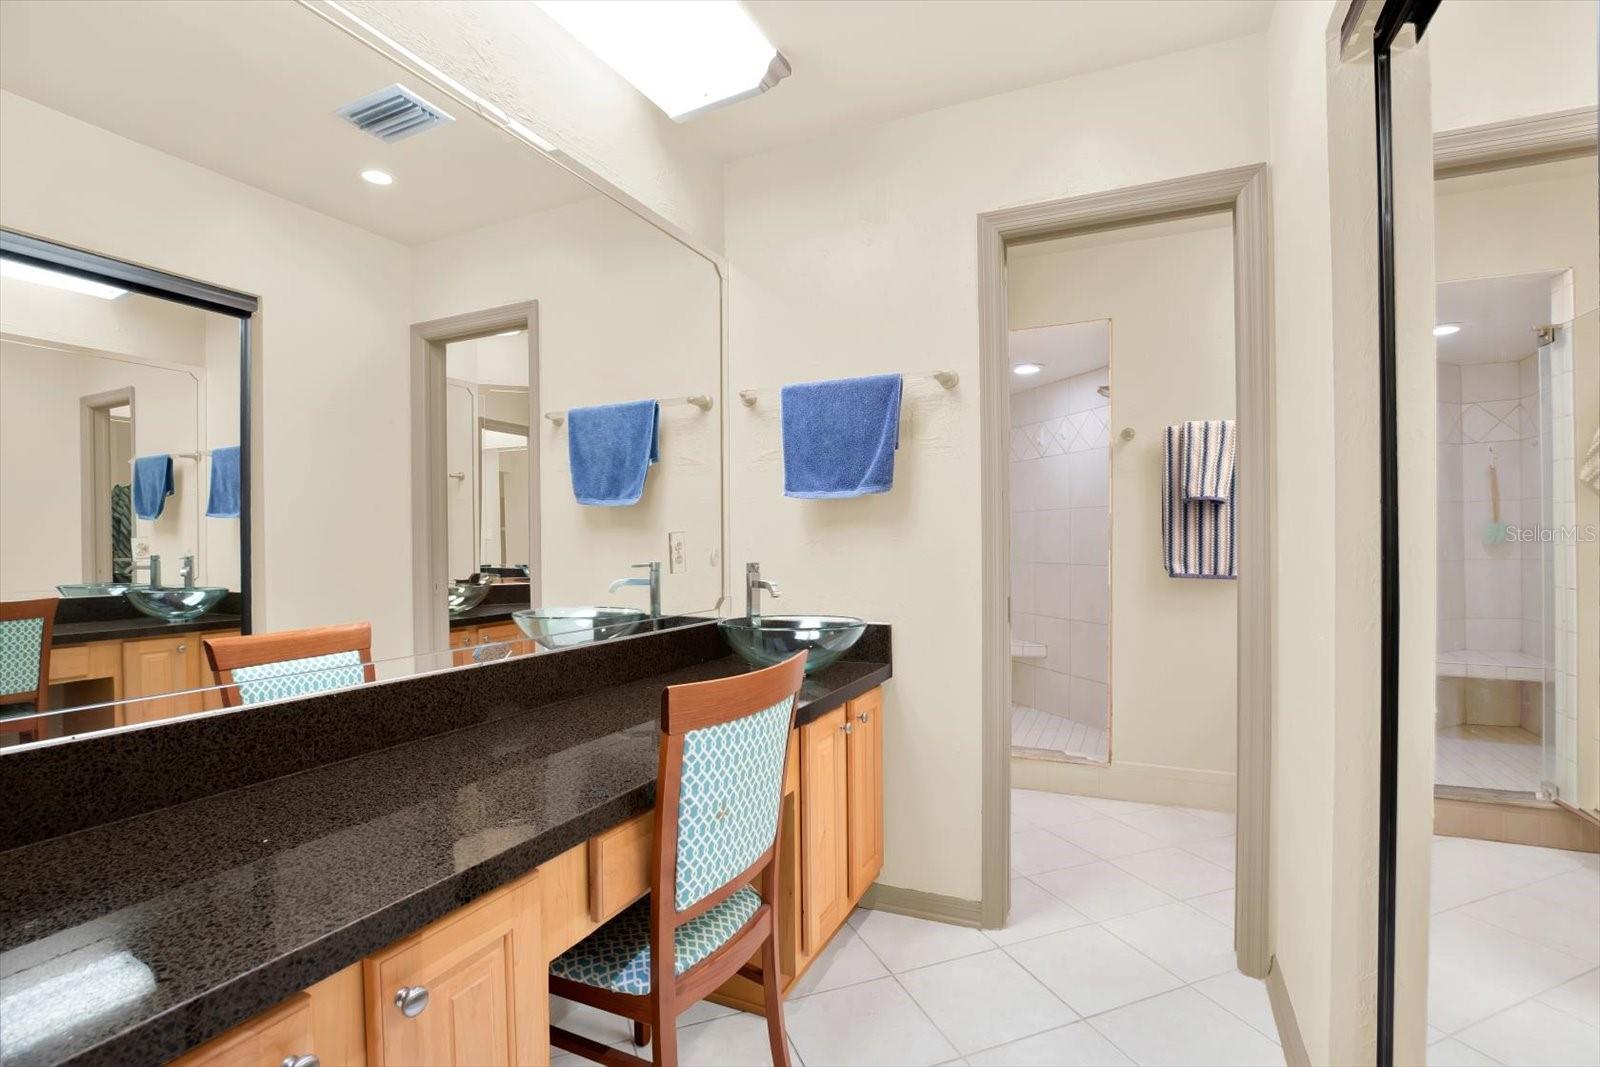 The bathroom has two separate sinks and a nice walk-in shower.